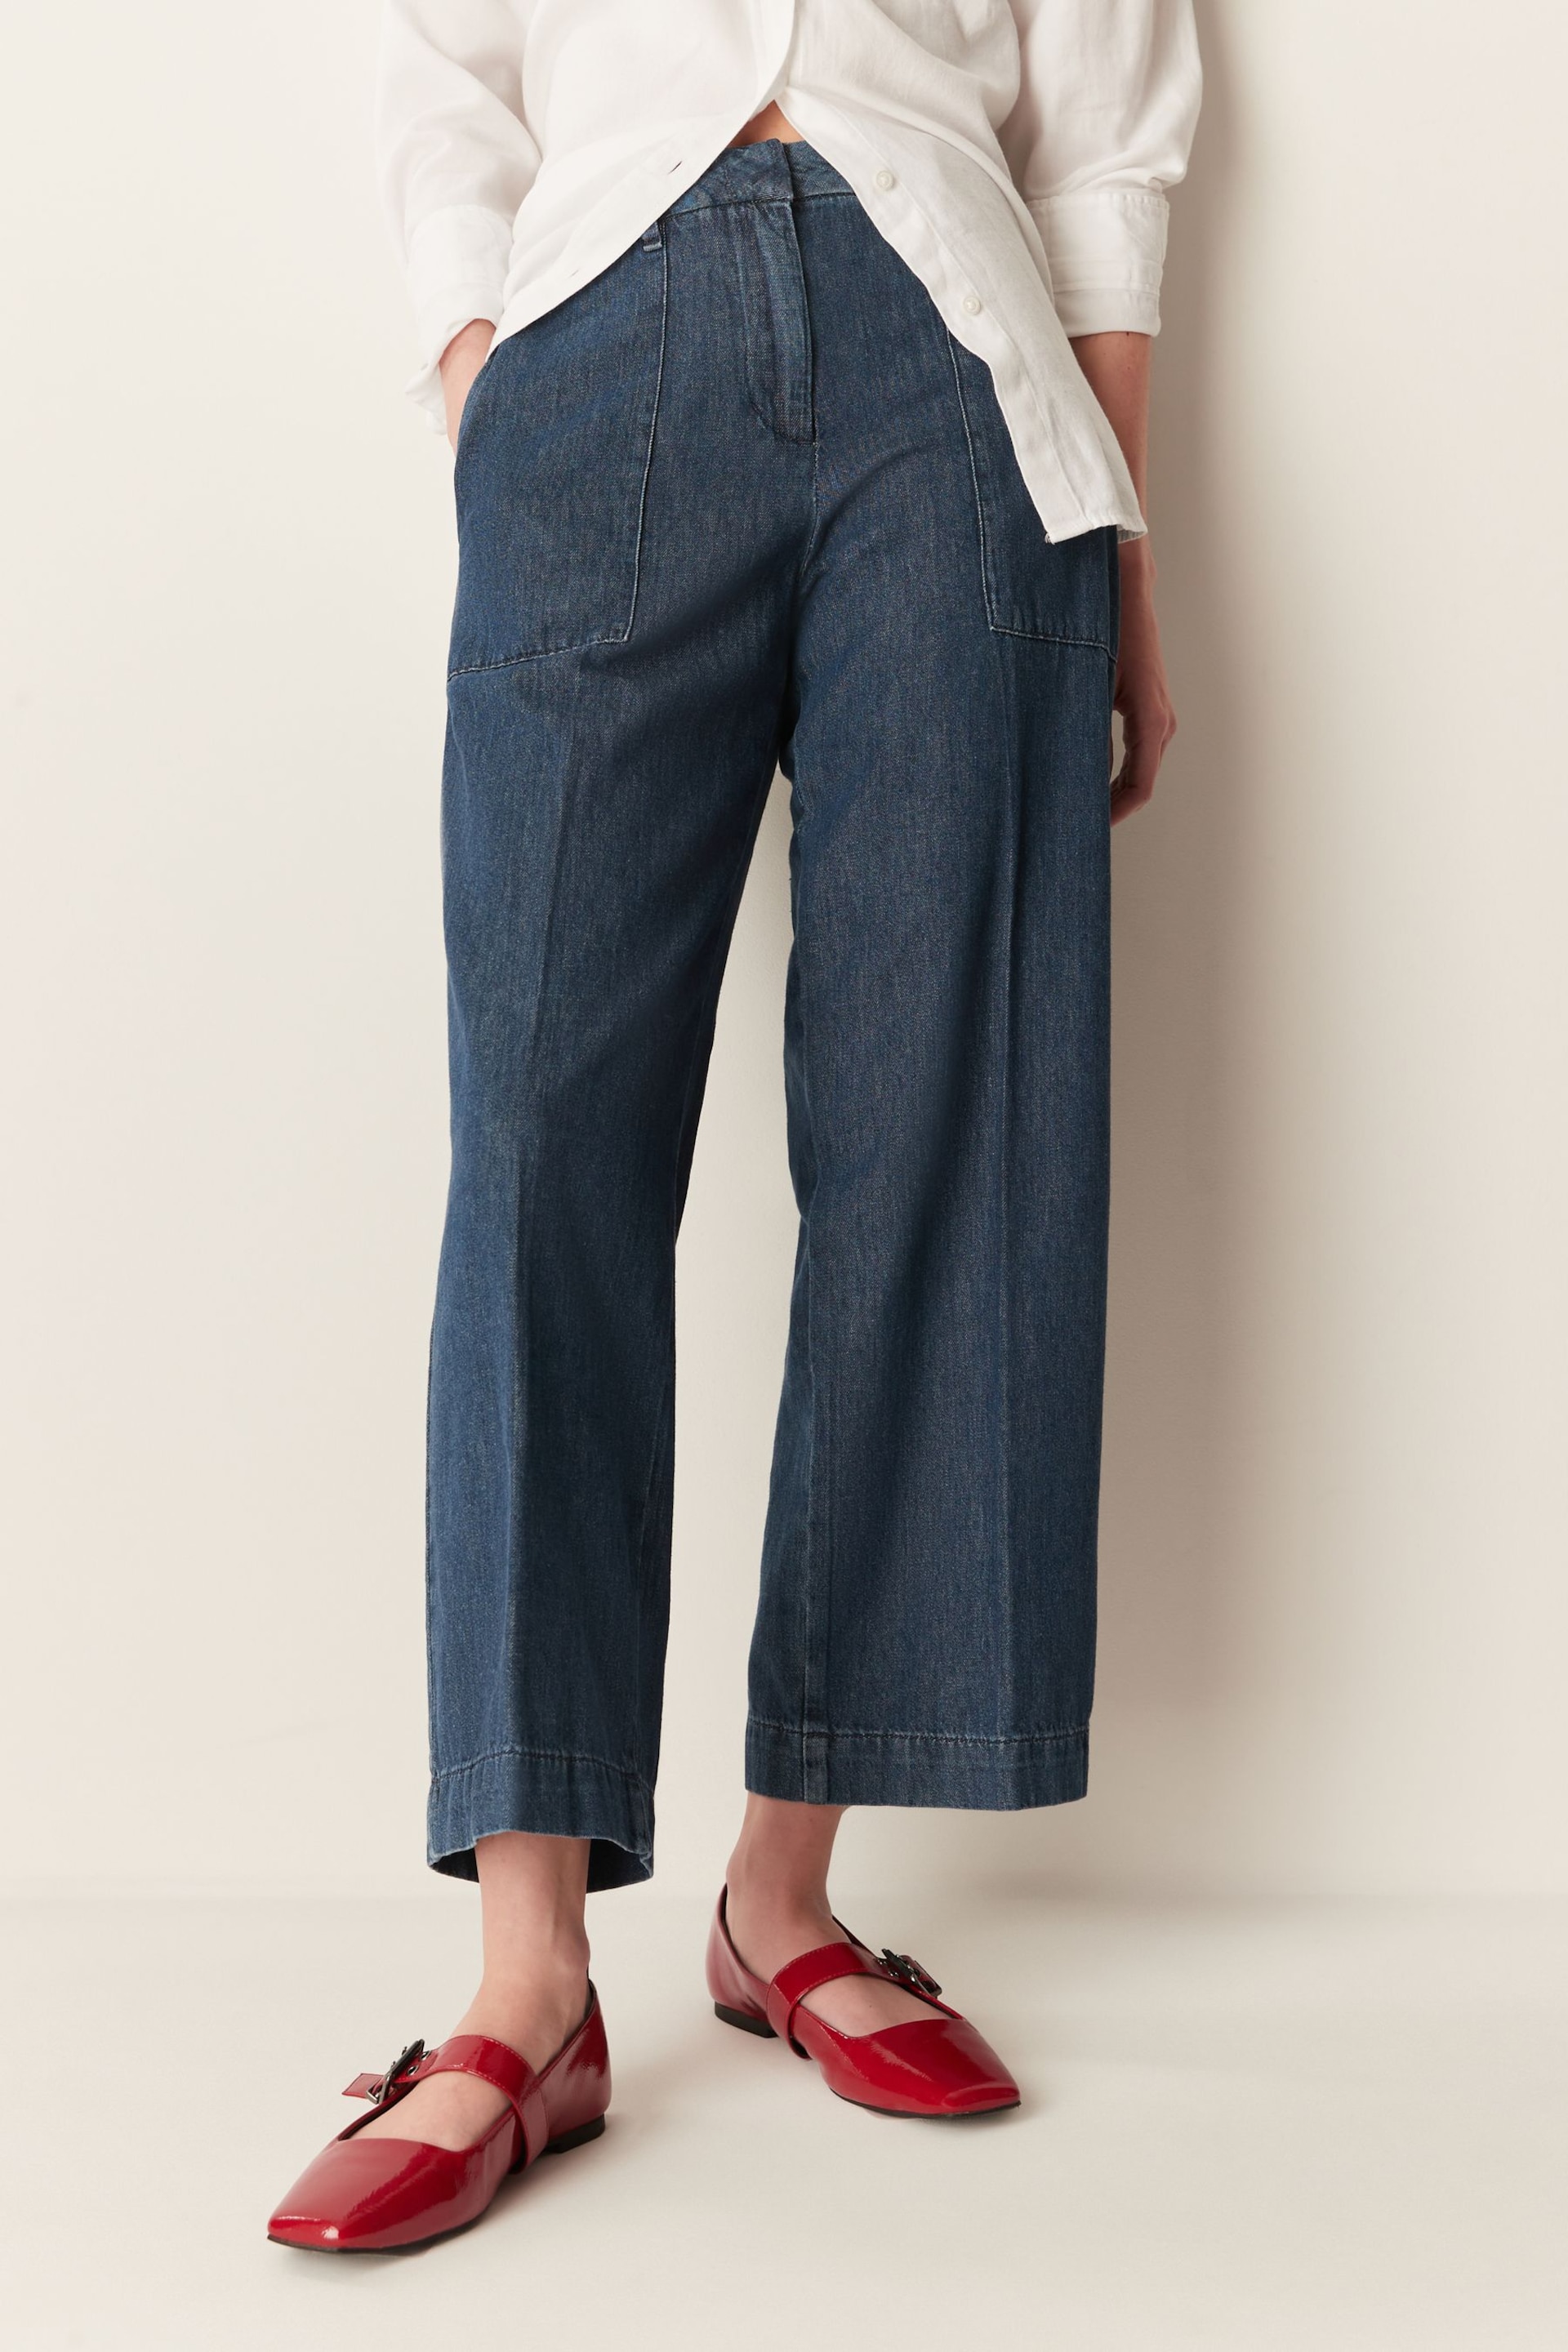 GANT Blue Relaxed Wide Leg Chambray Trousers - Image 1 of 2